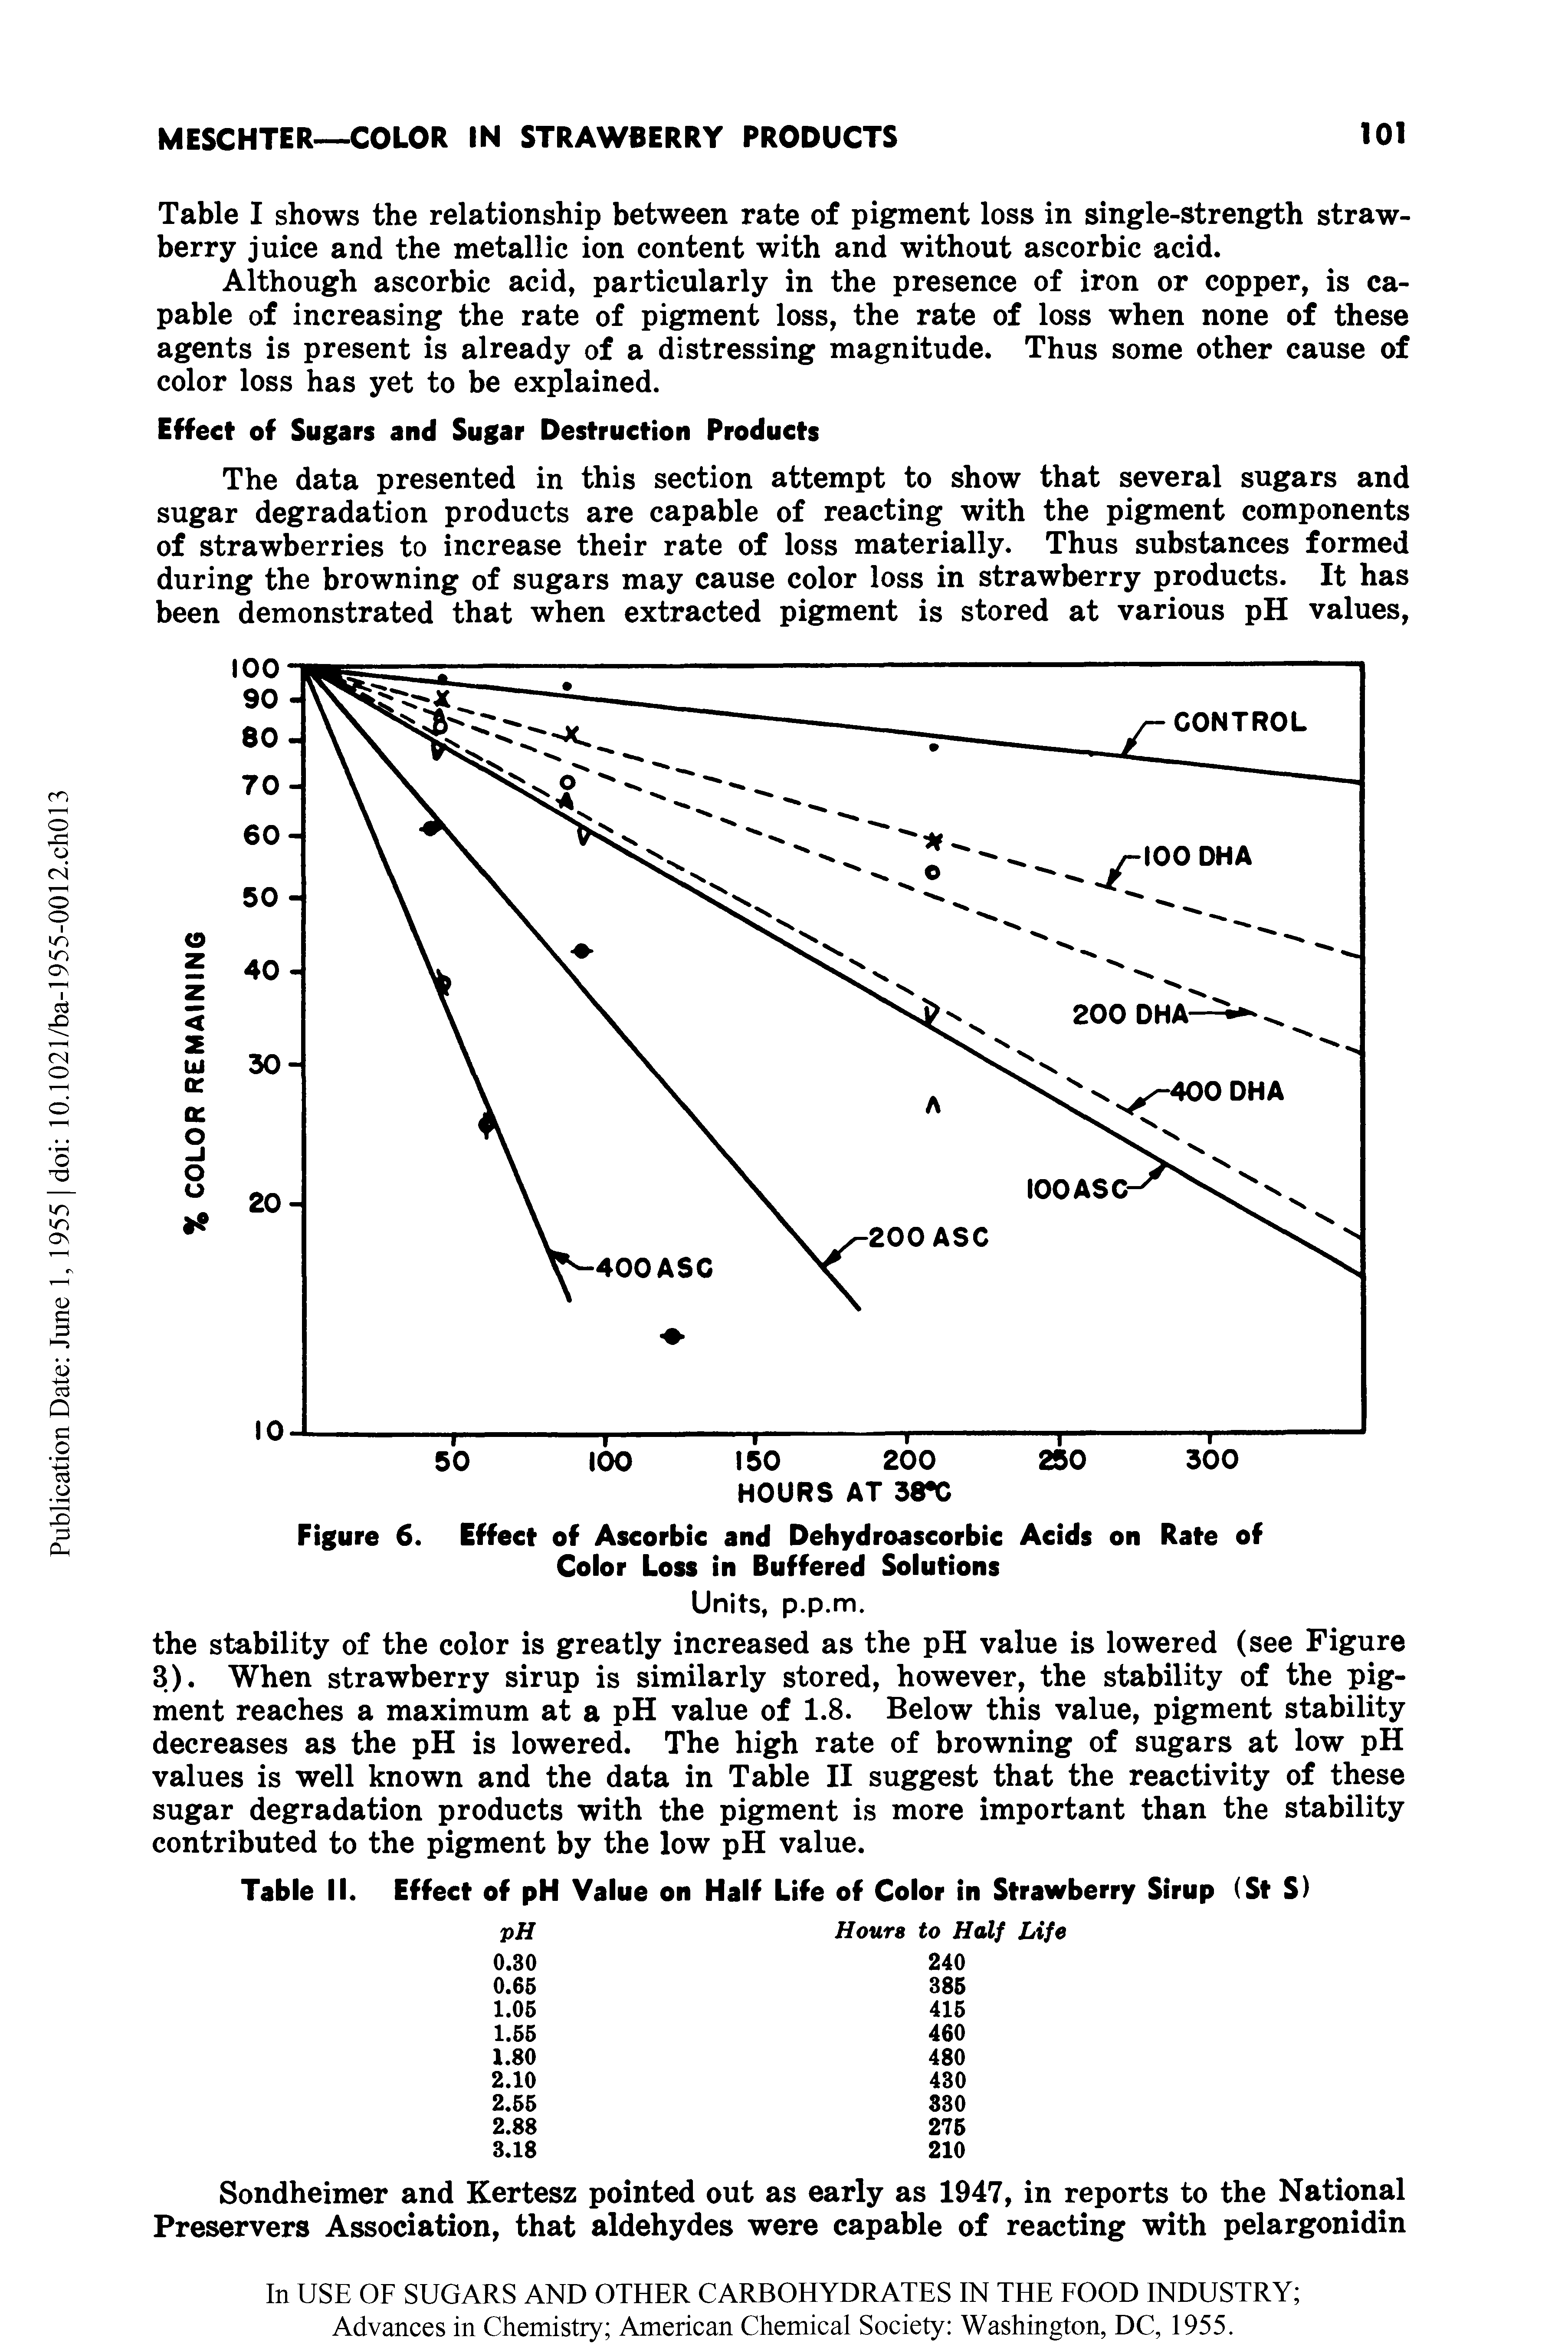 Table I shows the relationship between rate of pigment loss in single-strength strawberry juice and the metallic ion content with and without ascorbic acid.